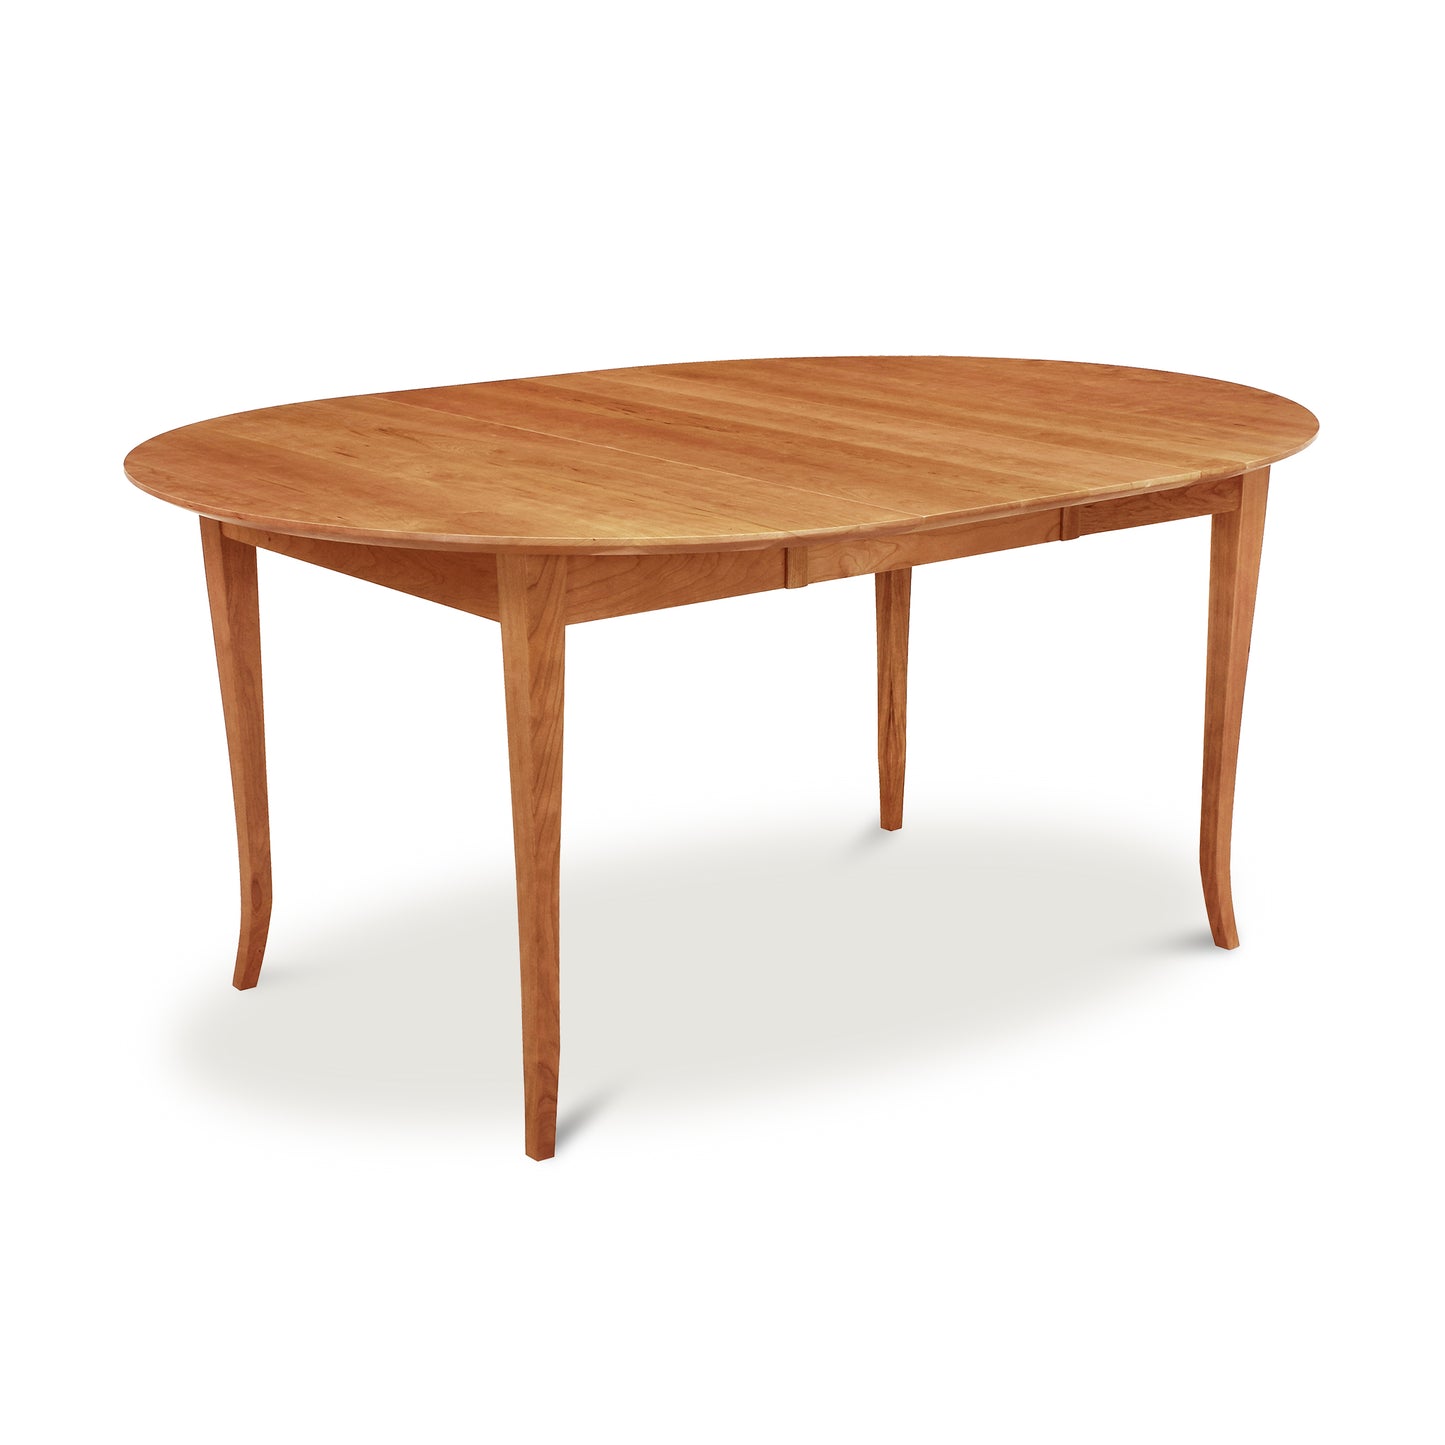 A sustainable Classic Shaker Flare Leg Round Extension Table with a wooden top and legs, handmade in Vermont by Lyndon Furniture.